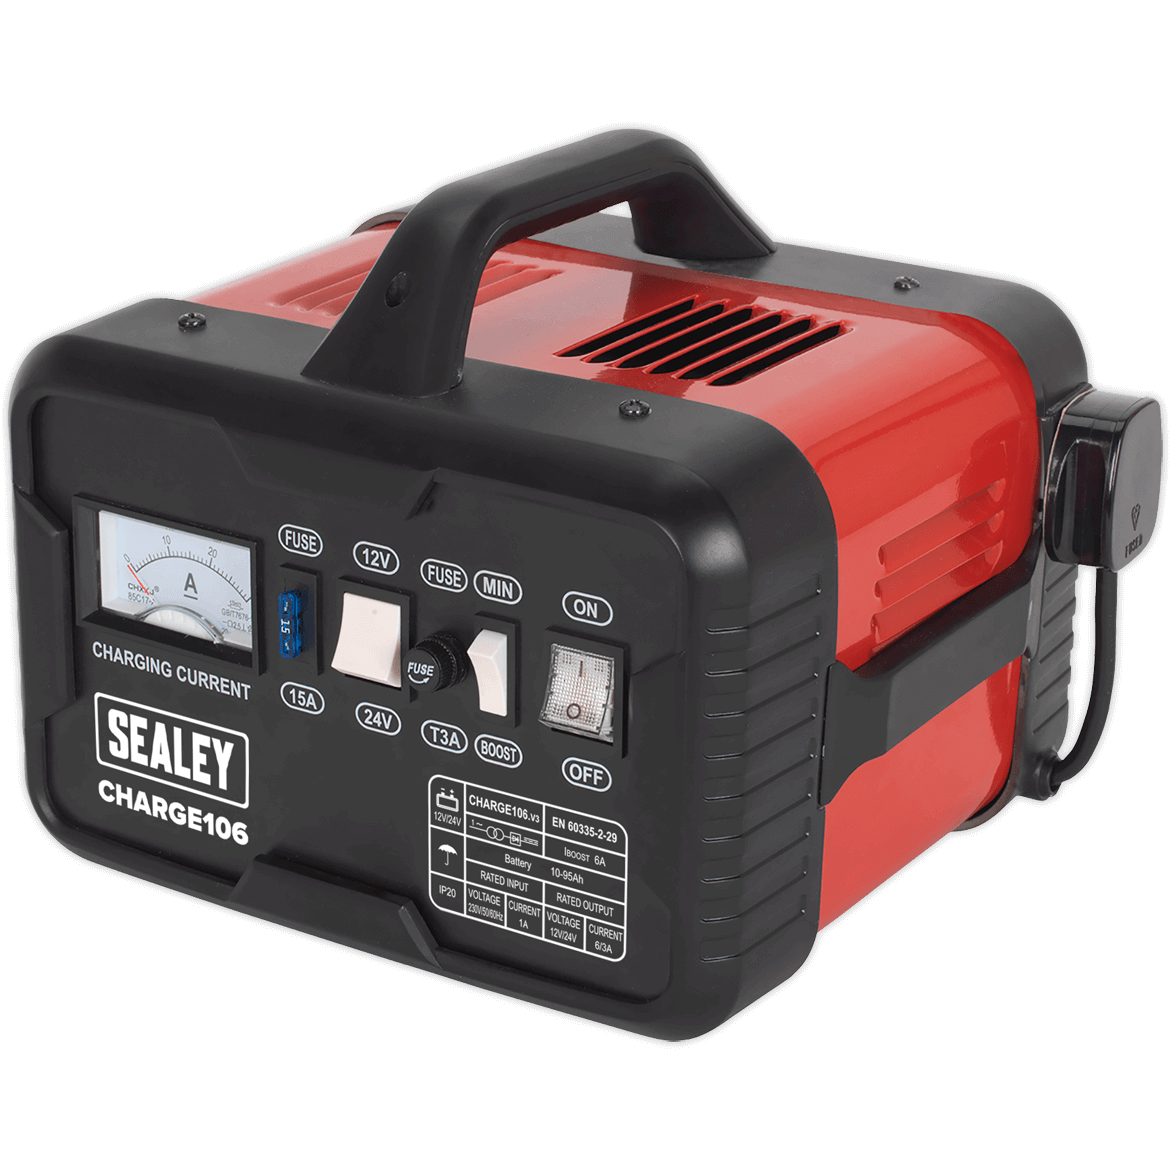 Sealey CHARGE106 Automotive Battery Charger 12v or 24v